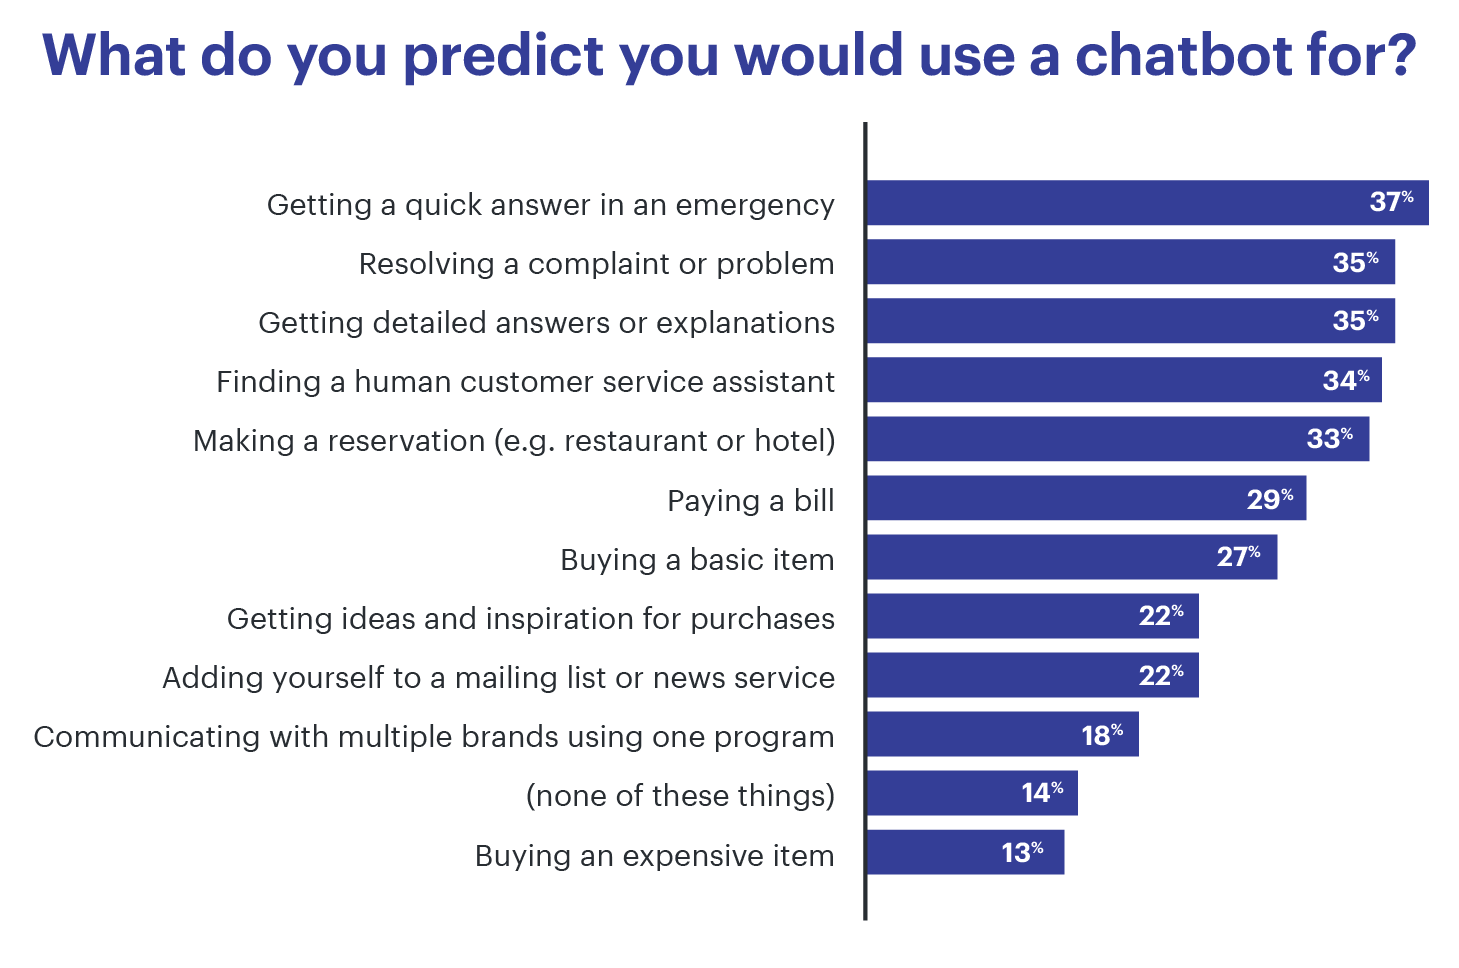 What do you predict you would use a chatbot for?